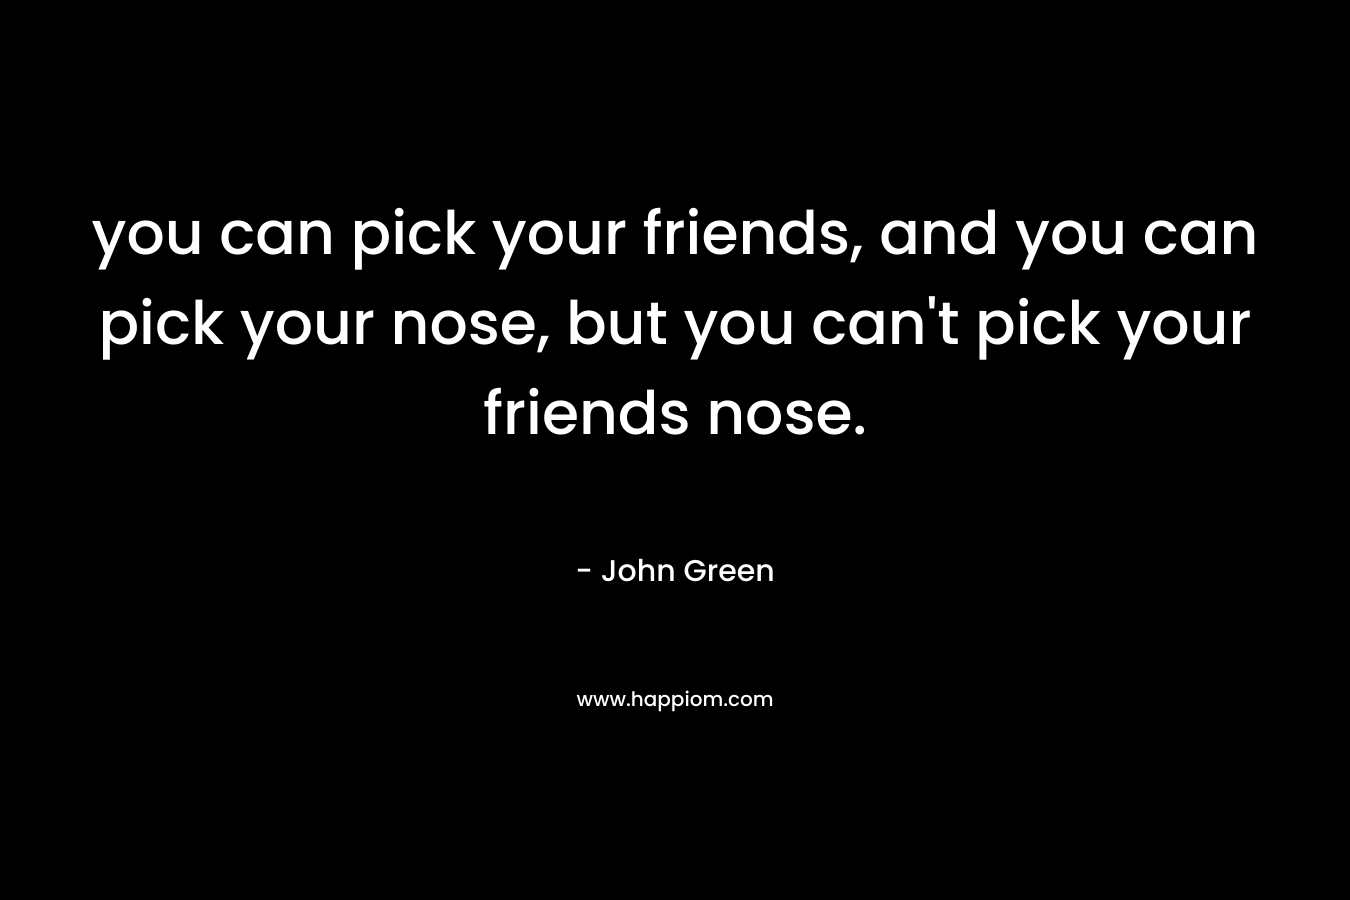 you can pick your friends, and you can pick your nose, but you can't pick your friends nose.